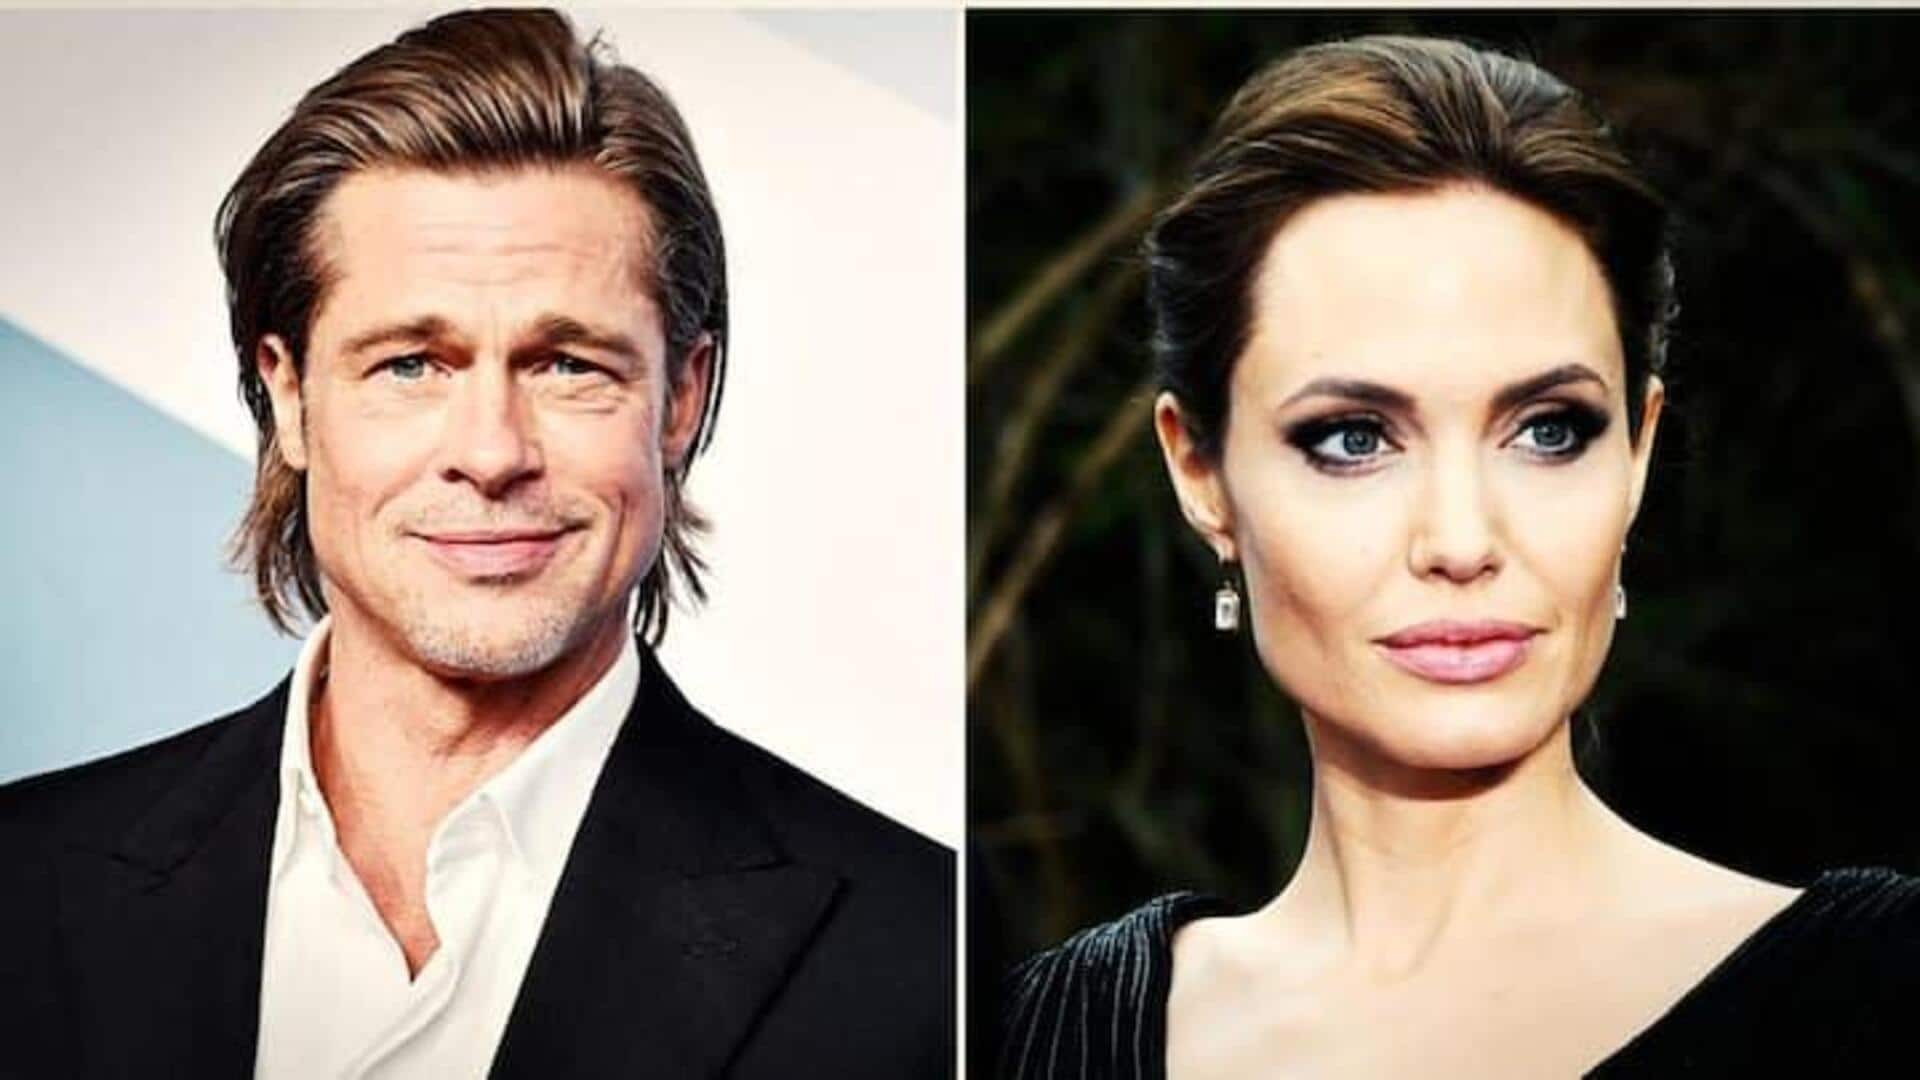 Angelina alleges physical abuse by Brad began 'well before' 2016 